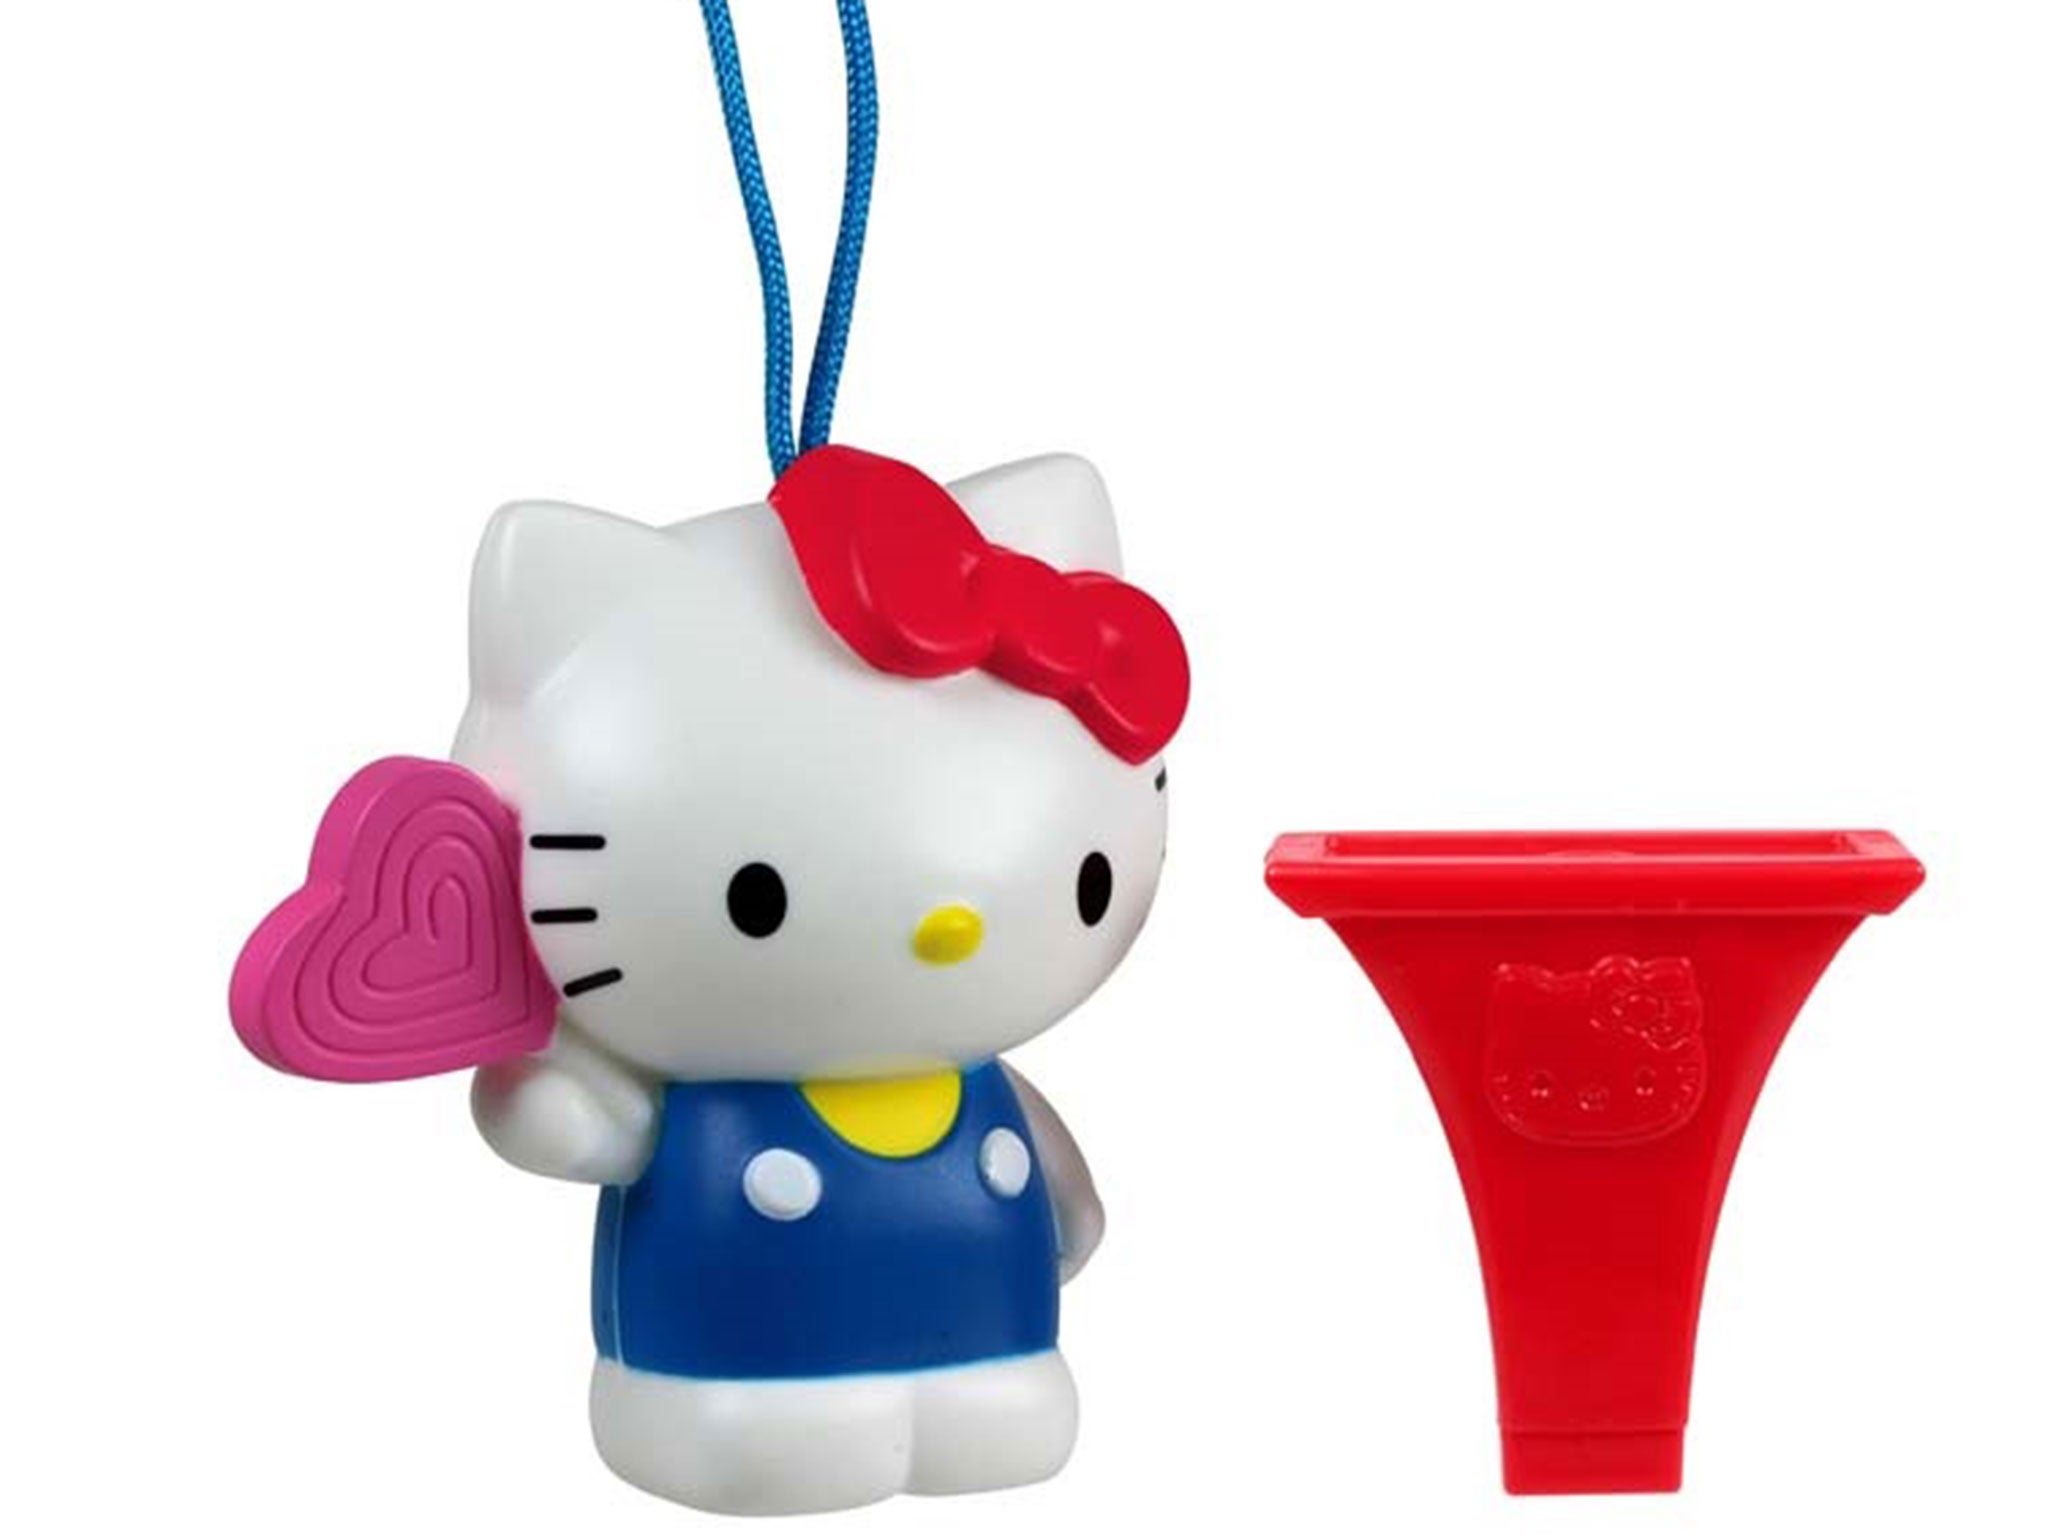 McDonald's has recalled approximately 2.5 million Hello Kitty toys from its Happy Meals because they pose a risk of choking